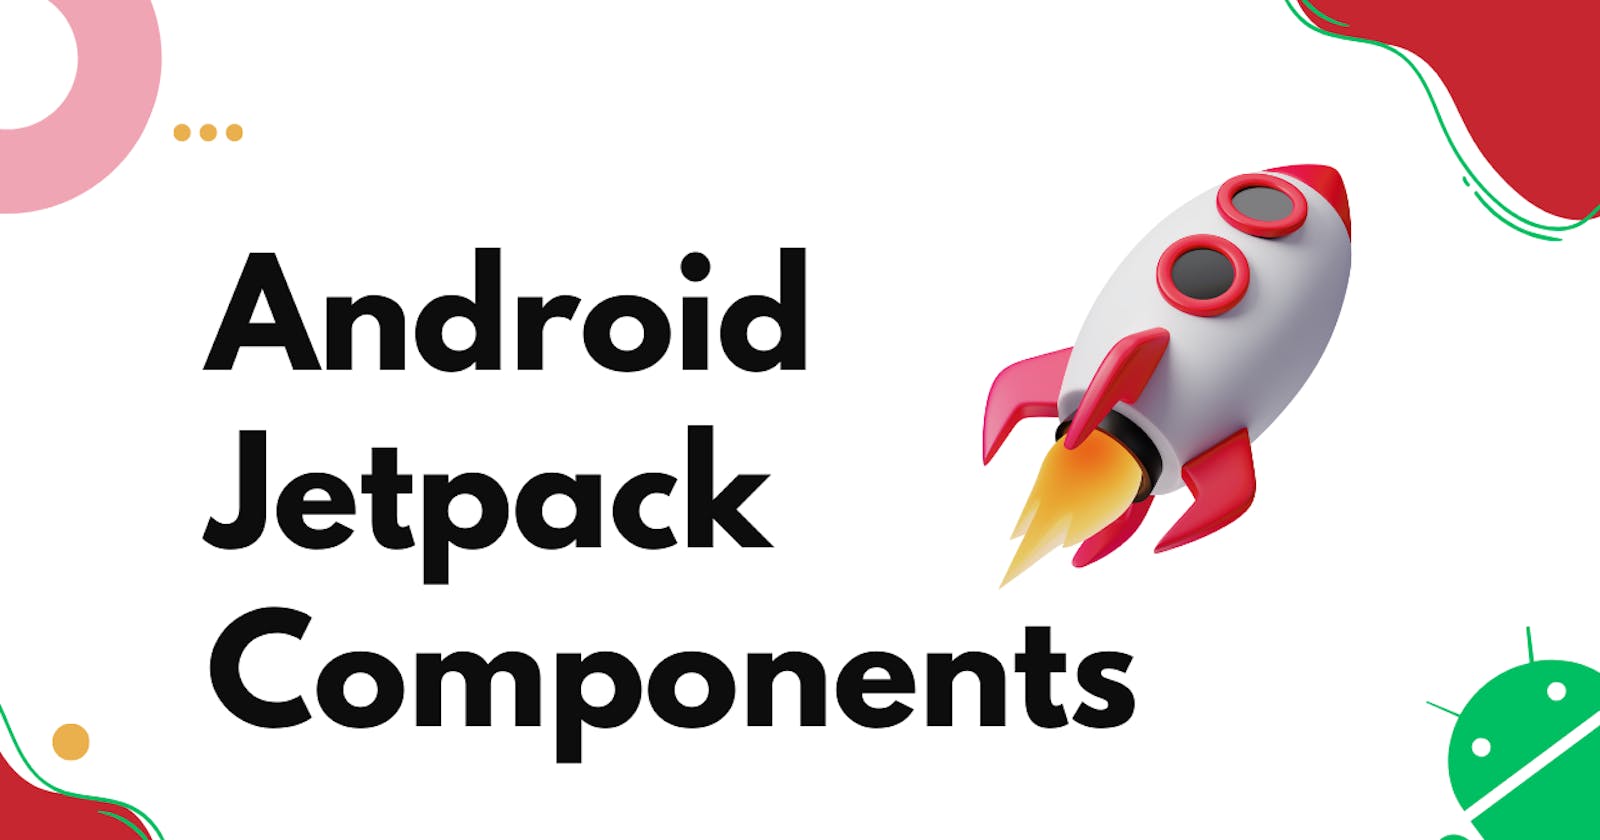 Android Jetpack Components: Explore the Jetpack libraries provided by Google